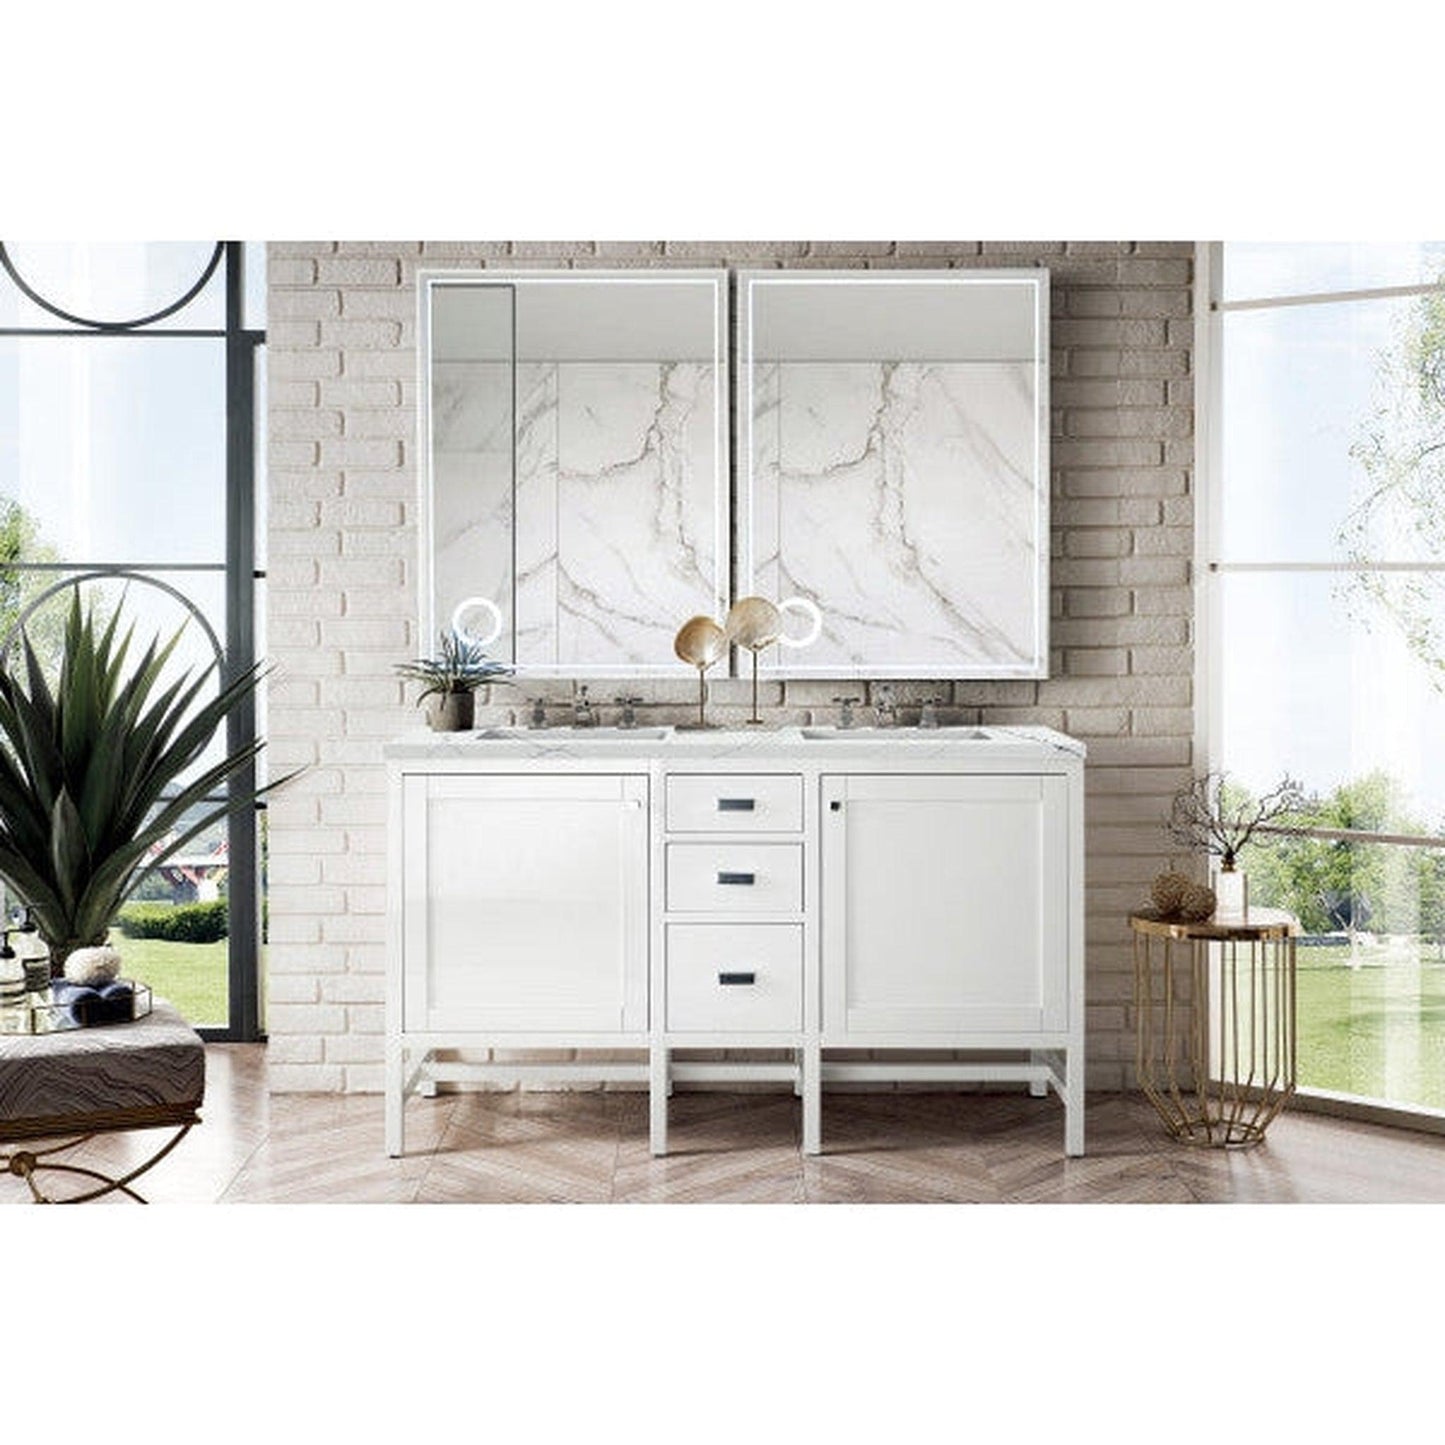 James Martin Addison 60" Double Glossy White Bathroom Vanity With 1" Ethereal Noctis Quartz Top and Rectangular Ceramic Sink